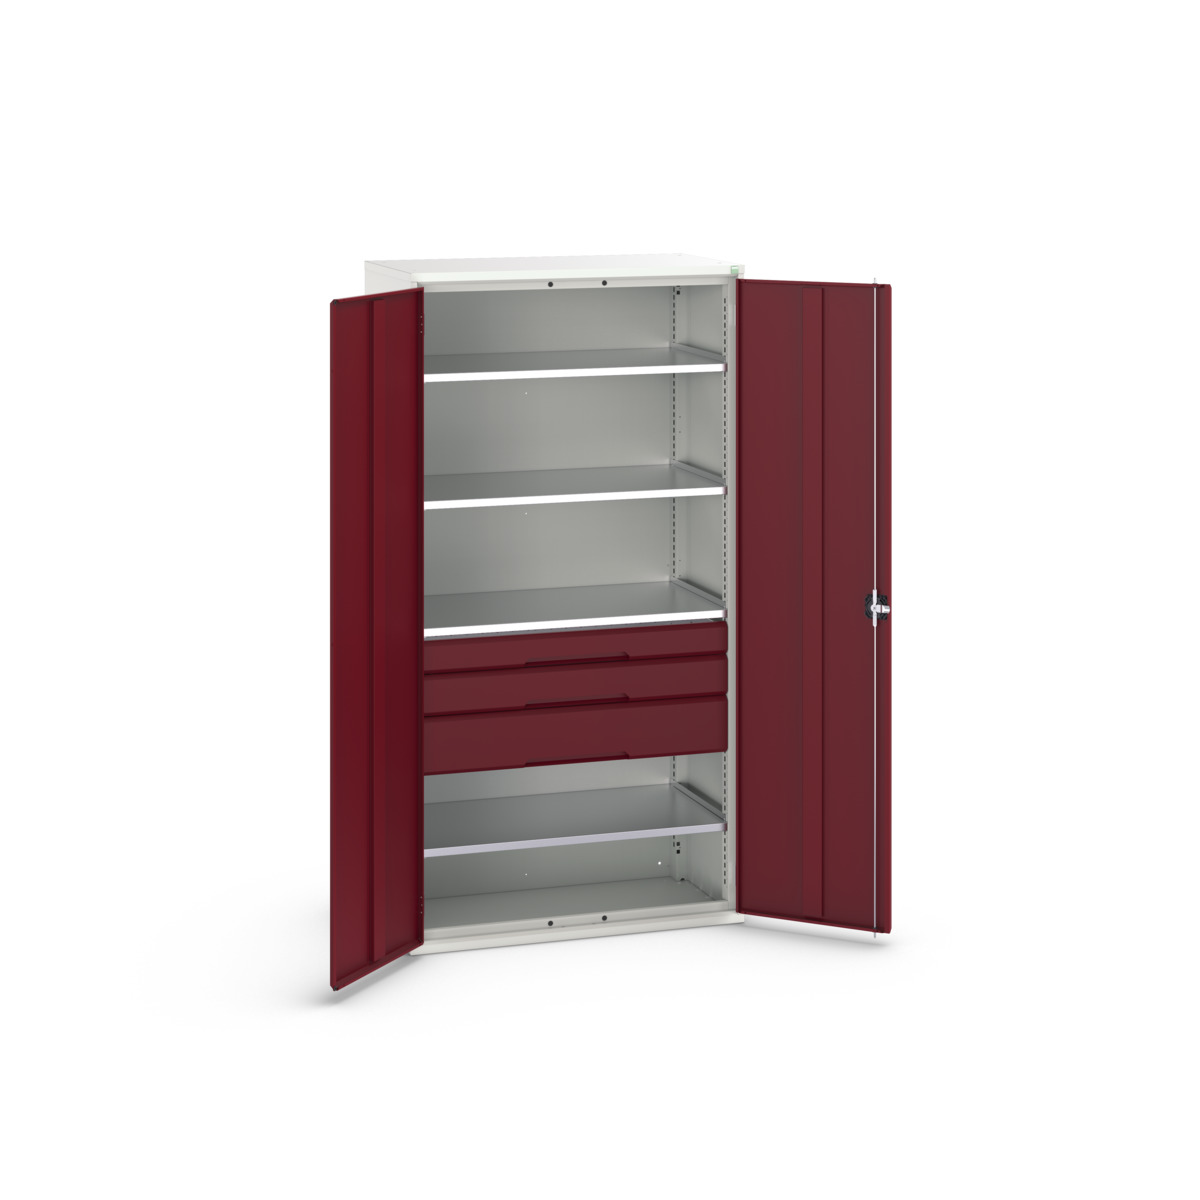 16926575.24 - verso kitted cupboard